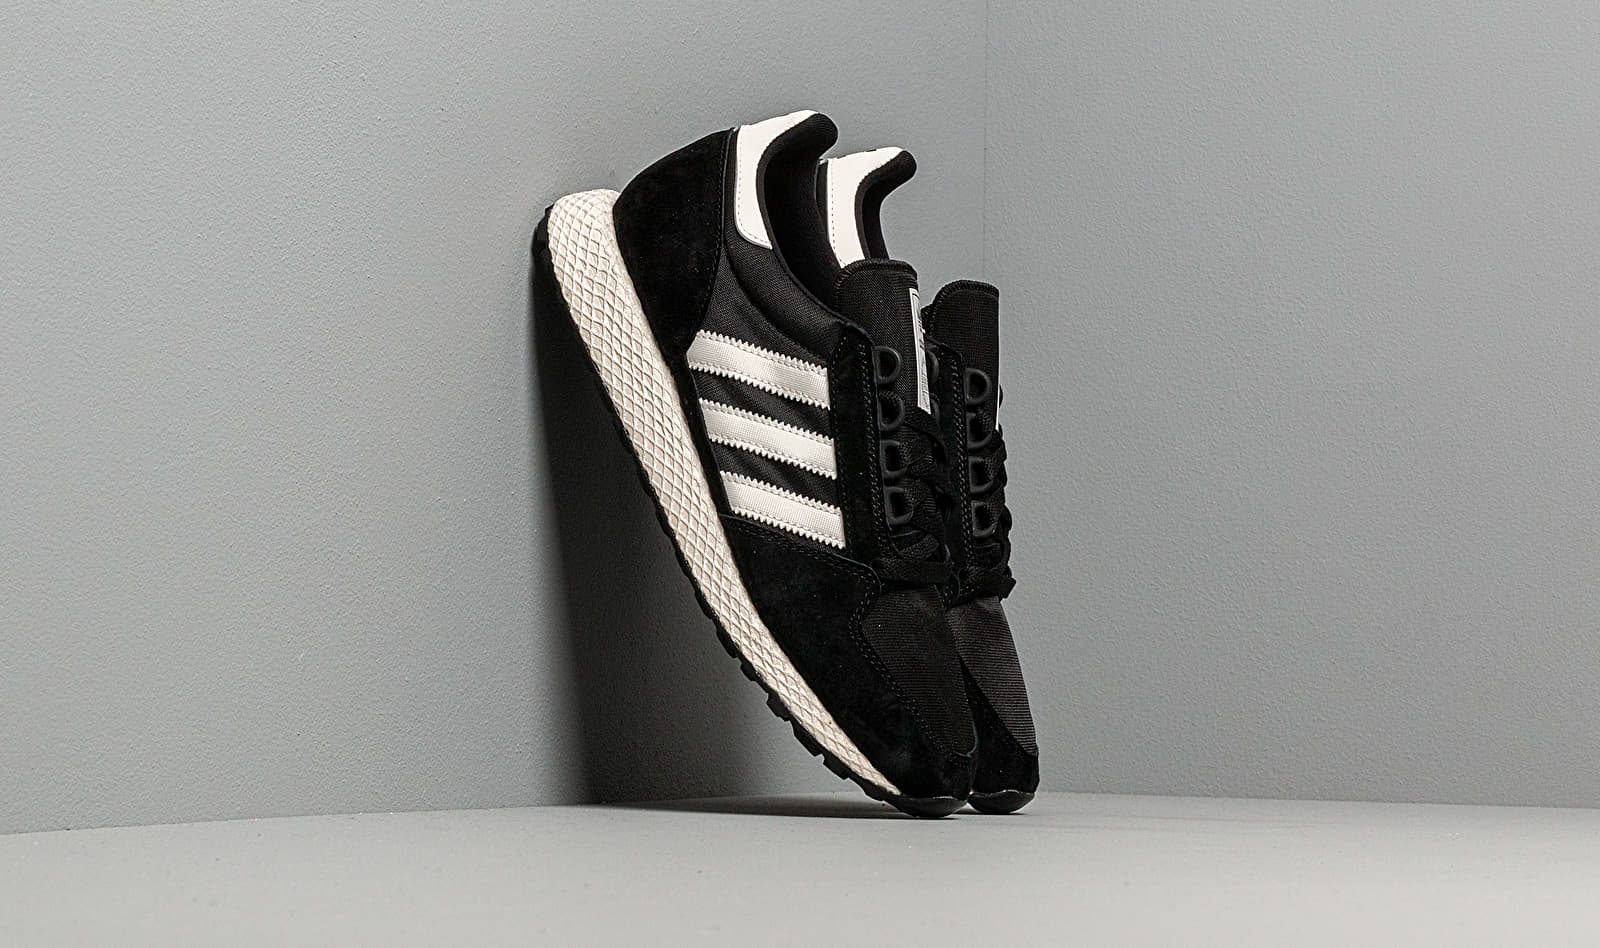 adidas Forest Grove Core Black/ Cloud White/ Core White EE5834